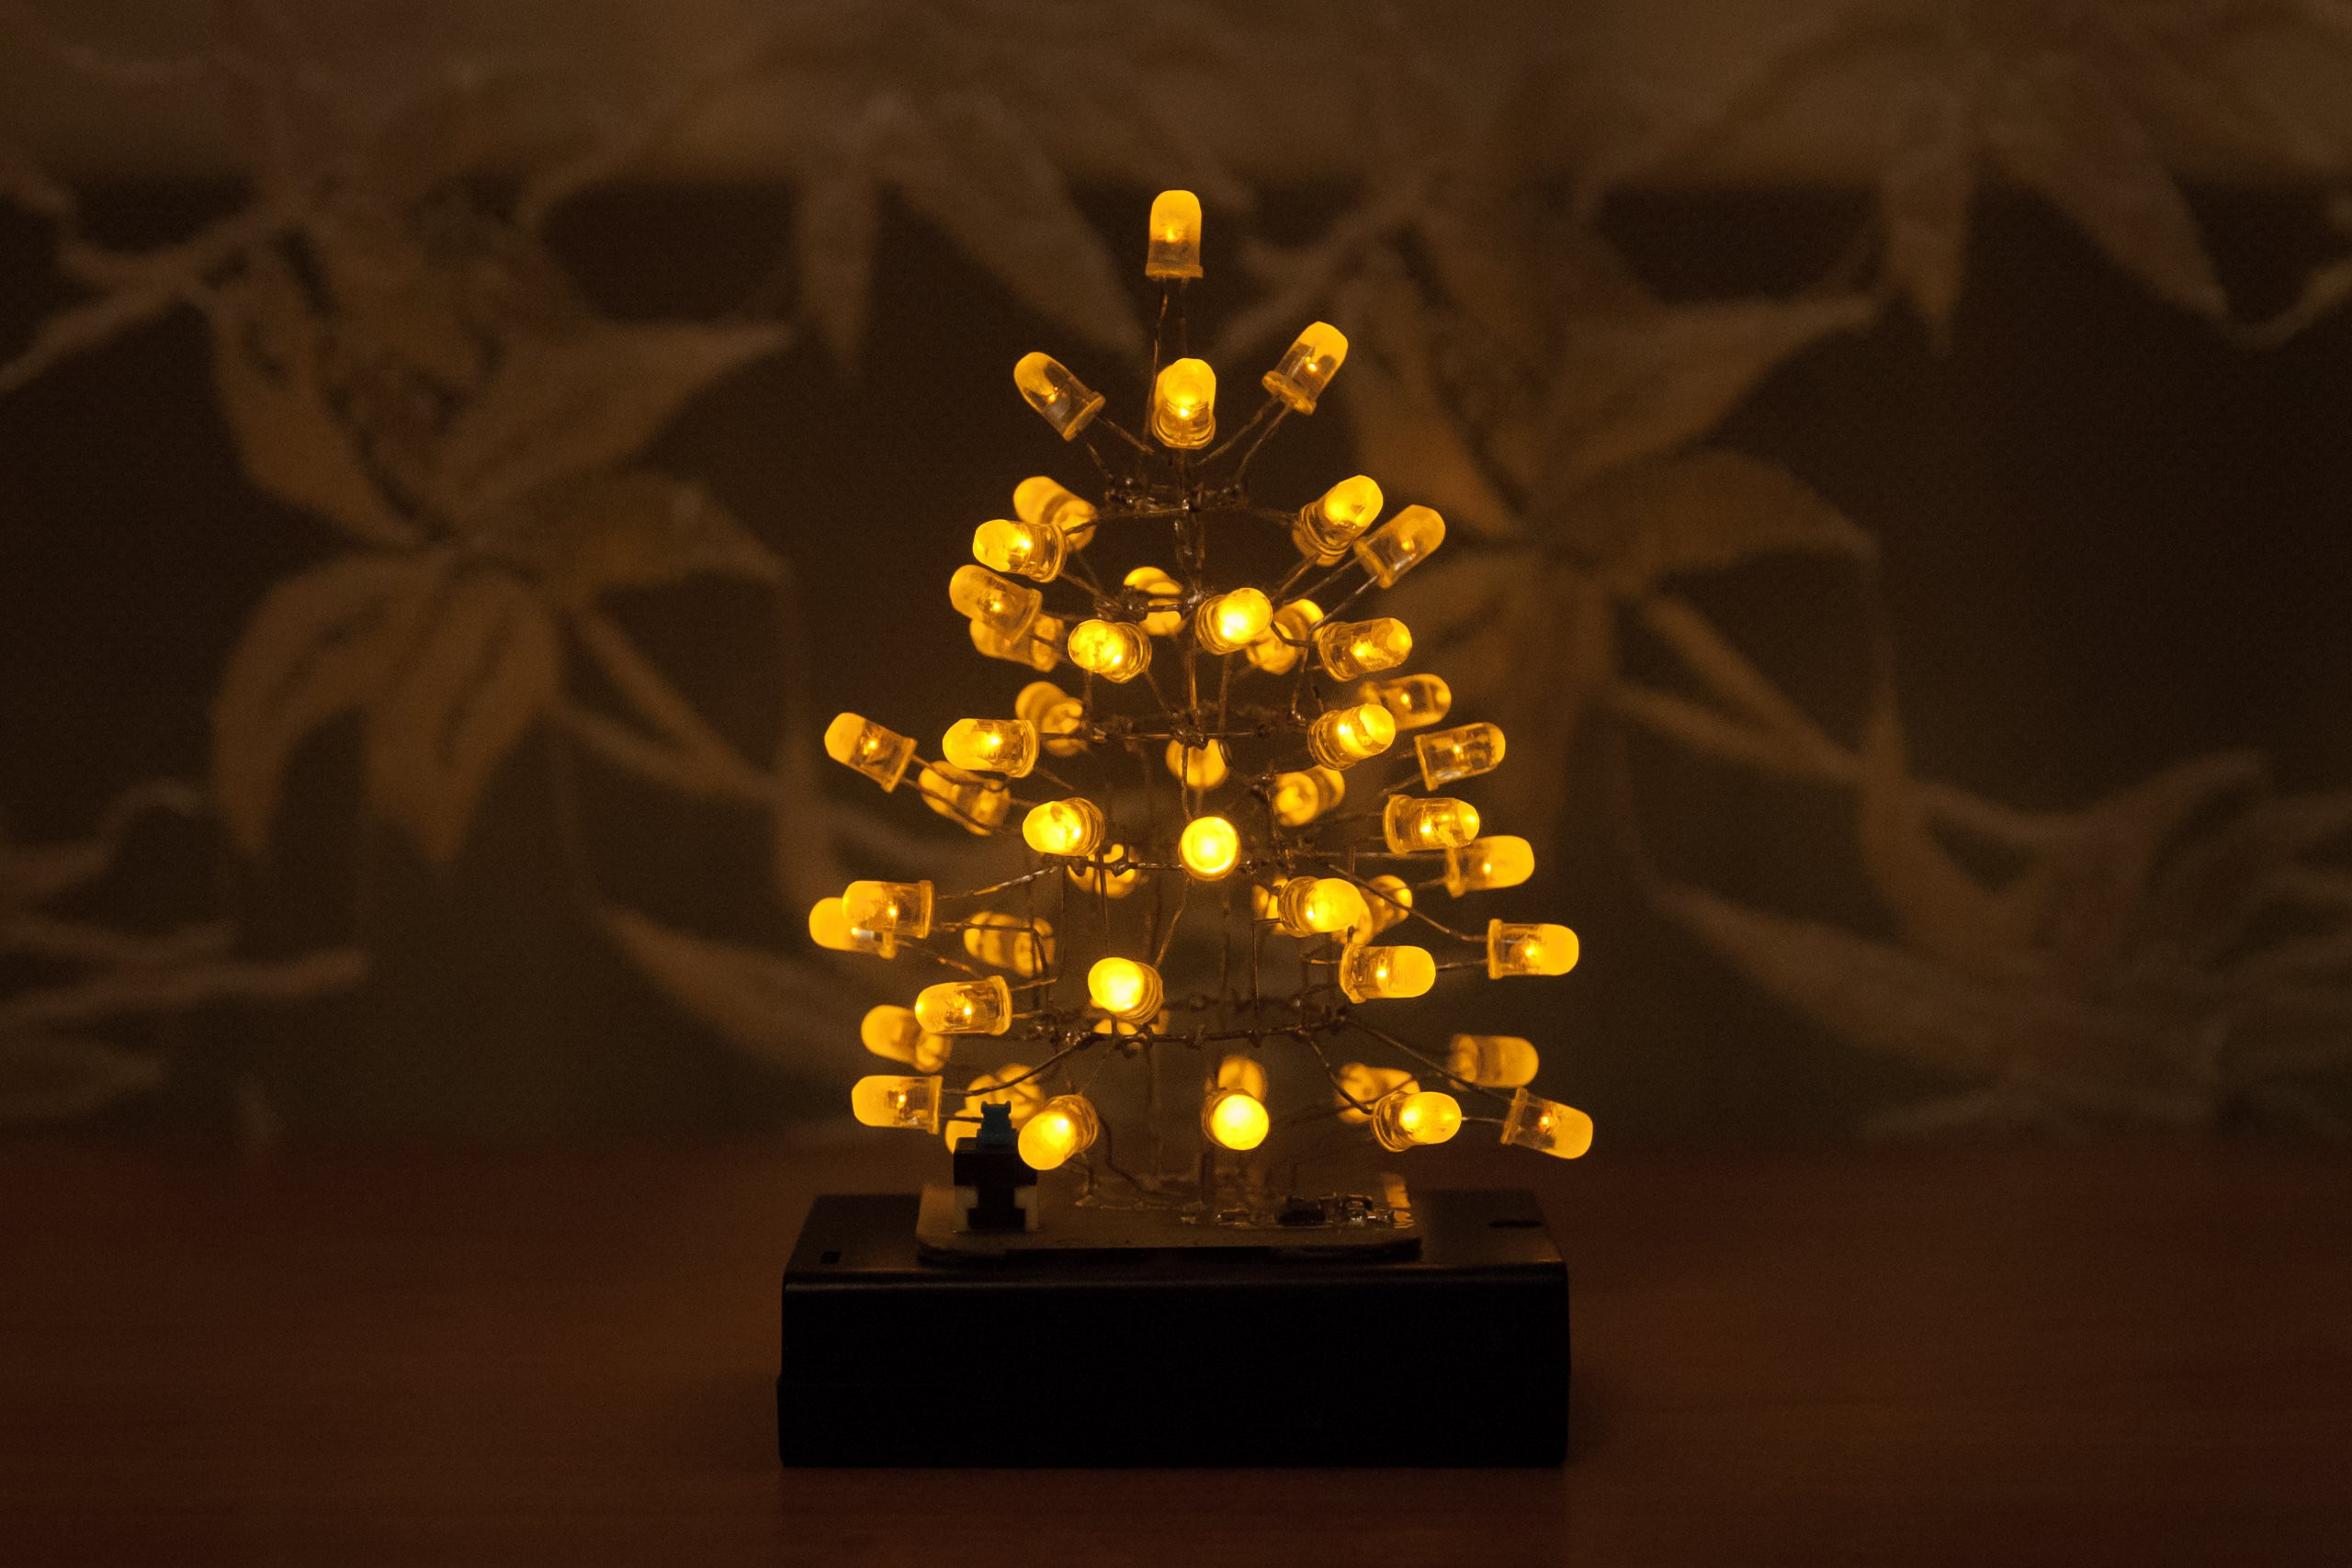 Gallery Flickering Led Christmas Tree Hackadayio with regard to measurements 2560 X 1707